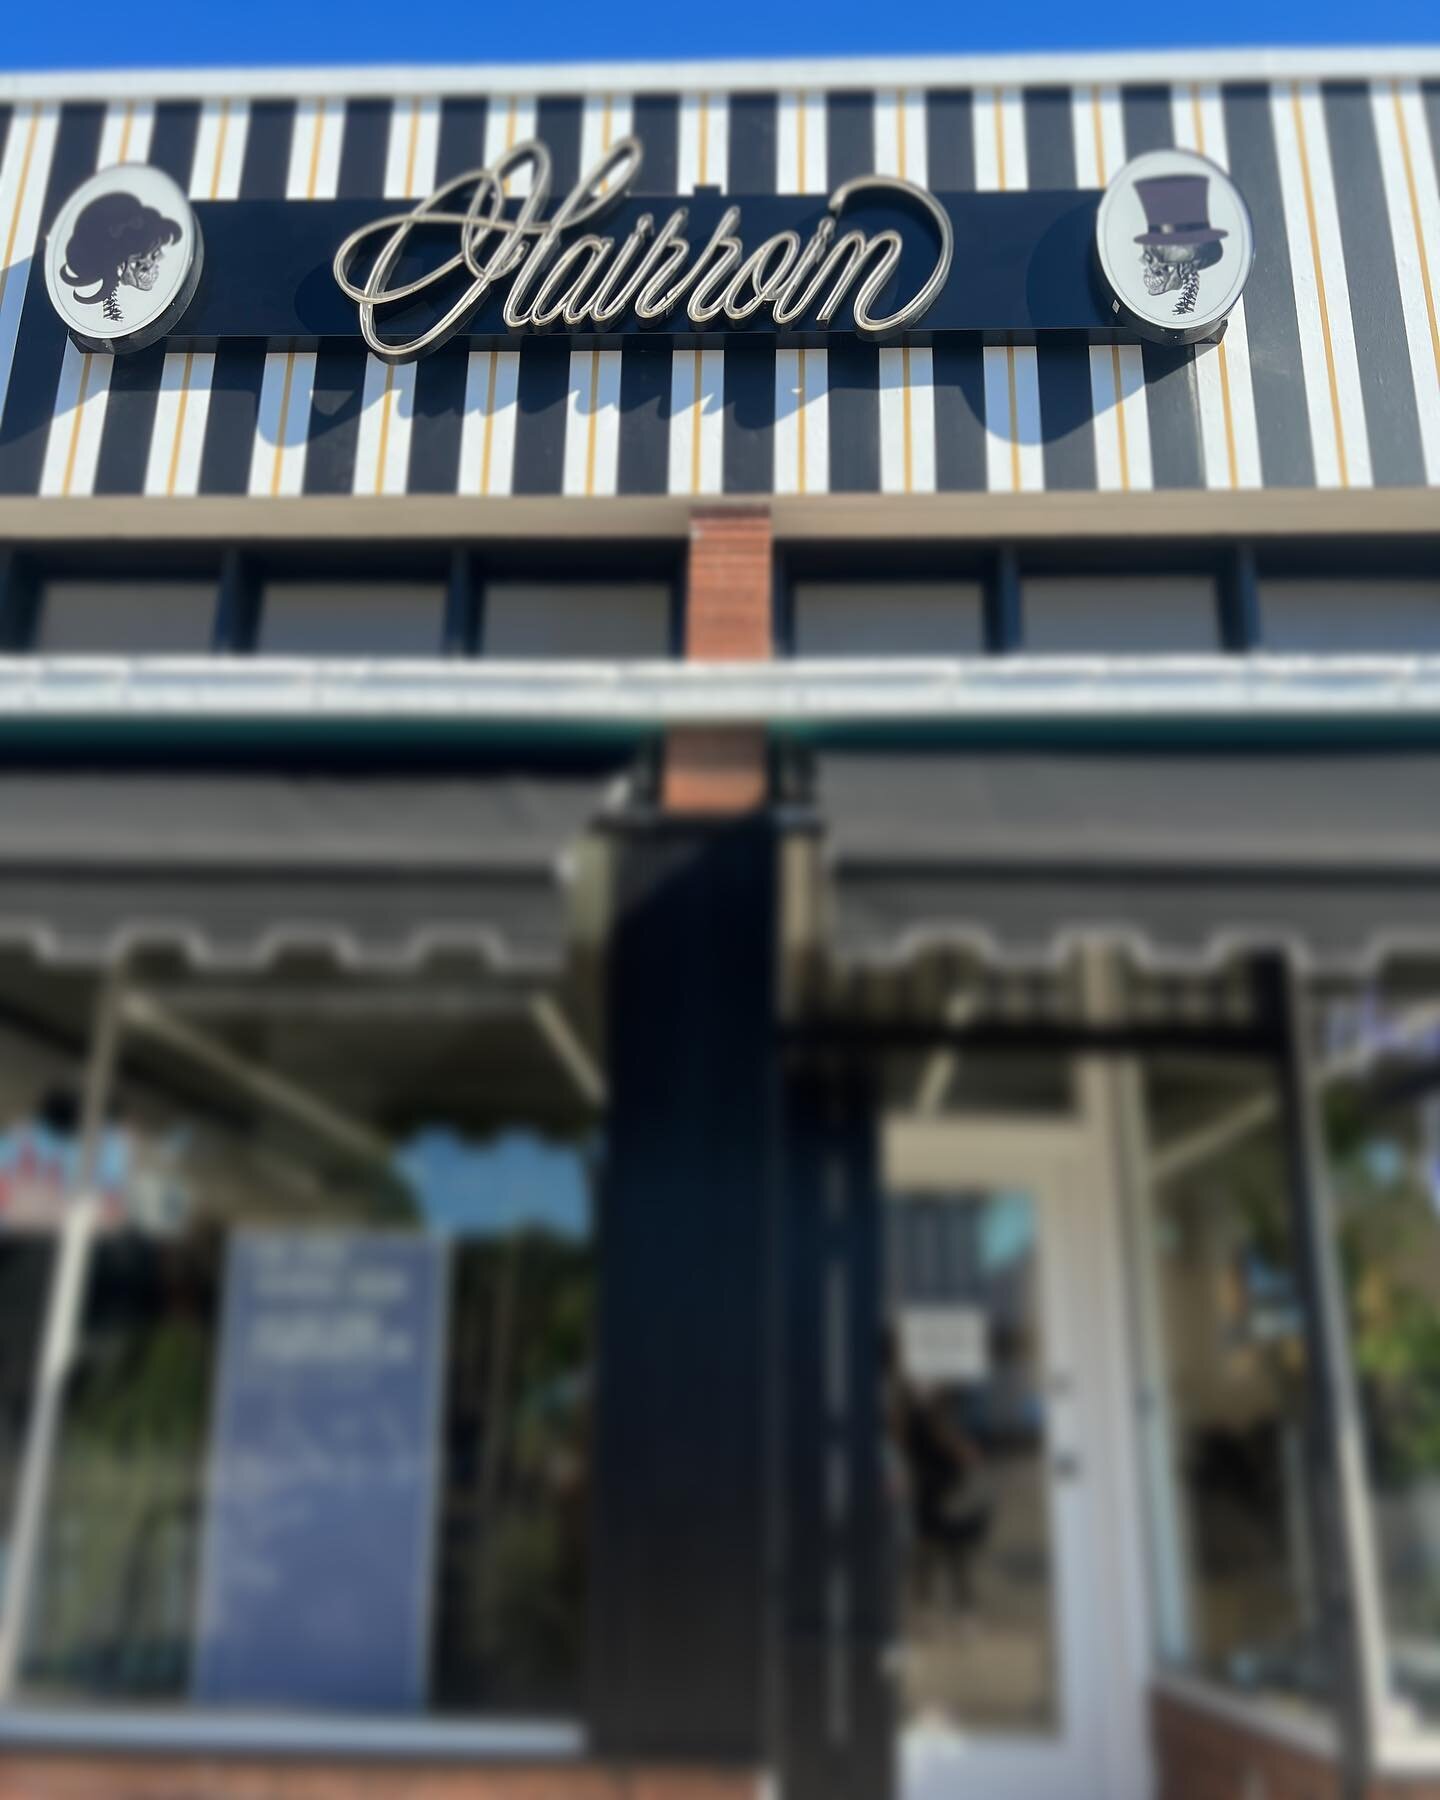 Our sign is officially up 🖤 come check out our new space ! 4637 Hollywood Blvd! #losfeliz #easthollywood #newlocation #losfelizsalon #lasalon #losangeles